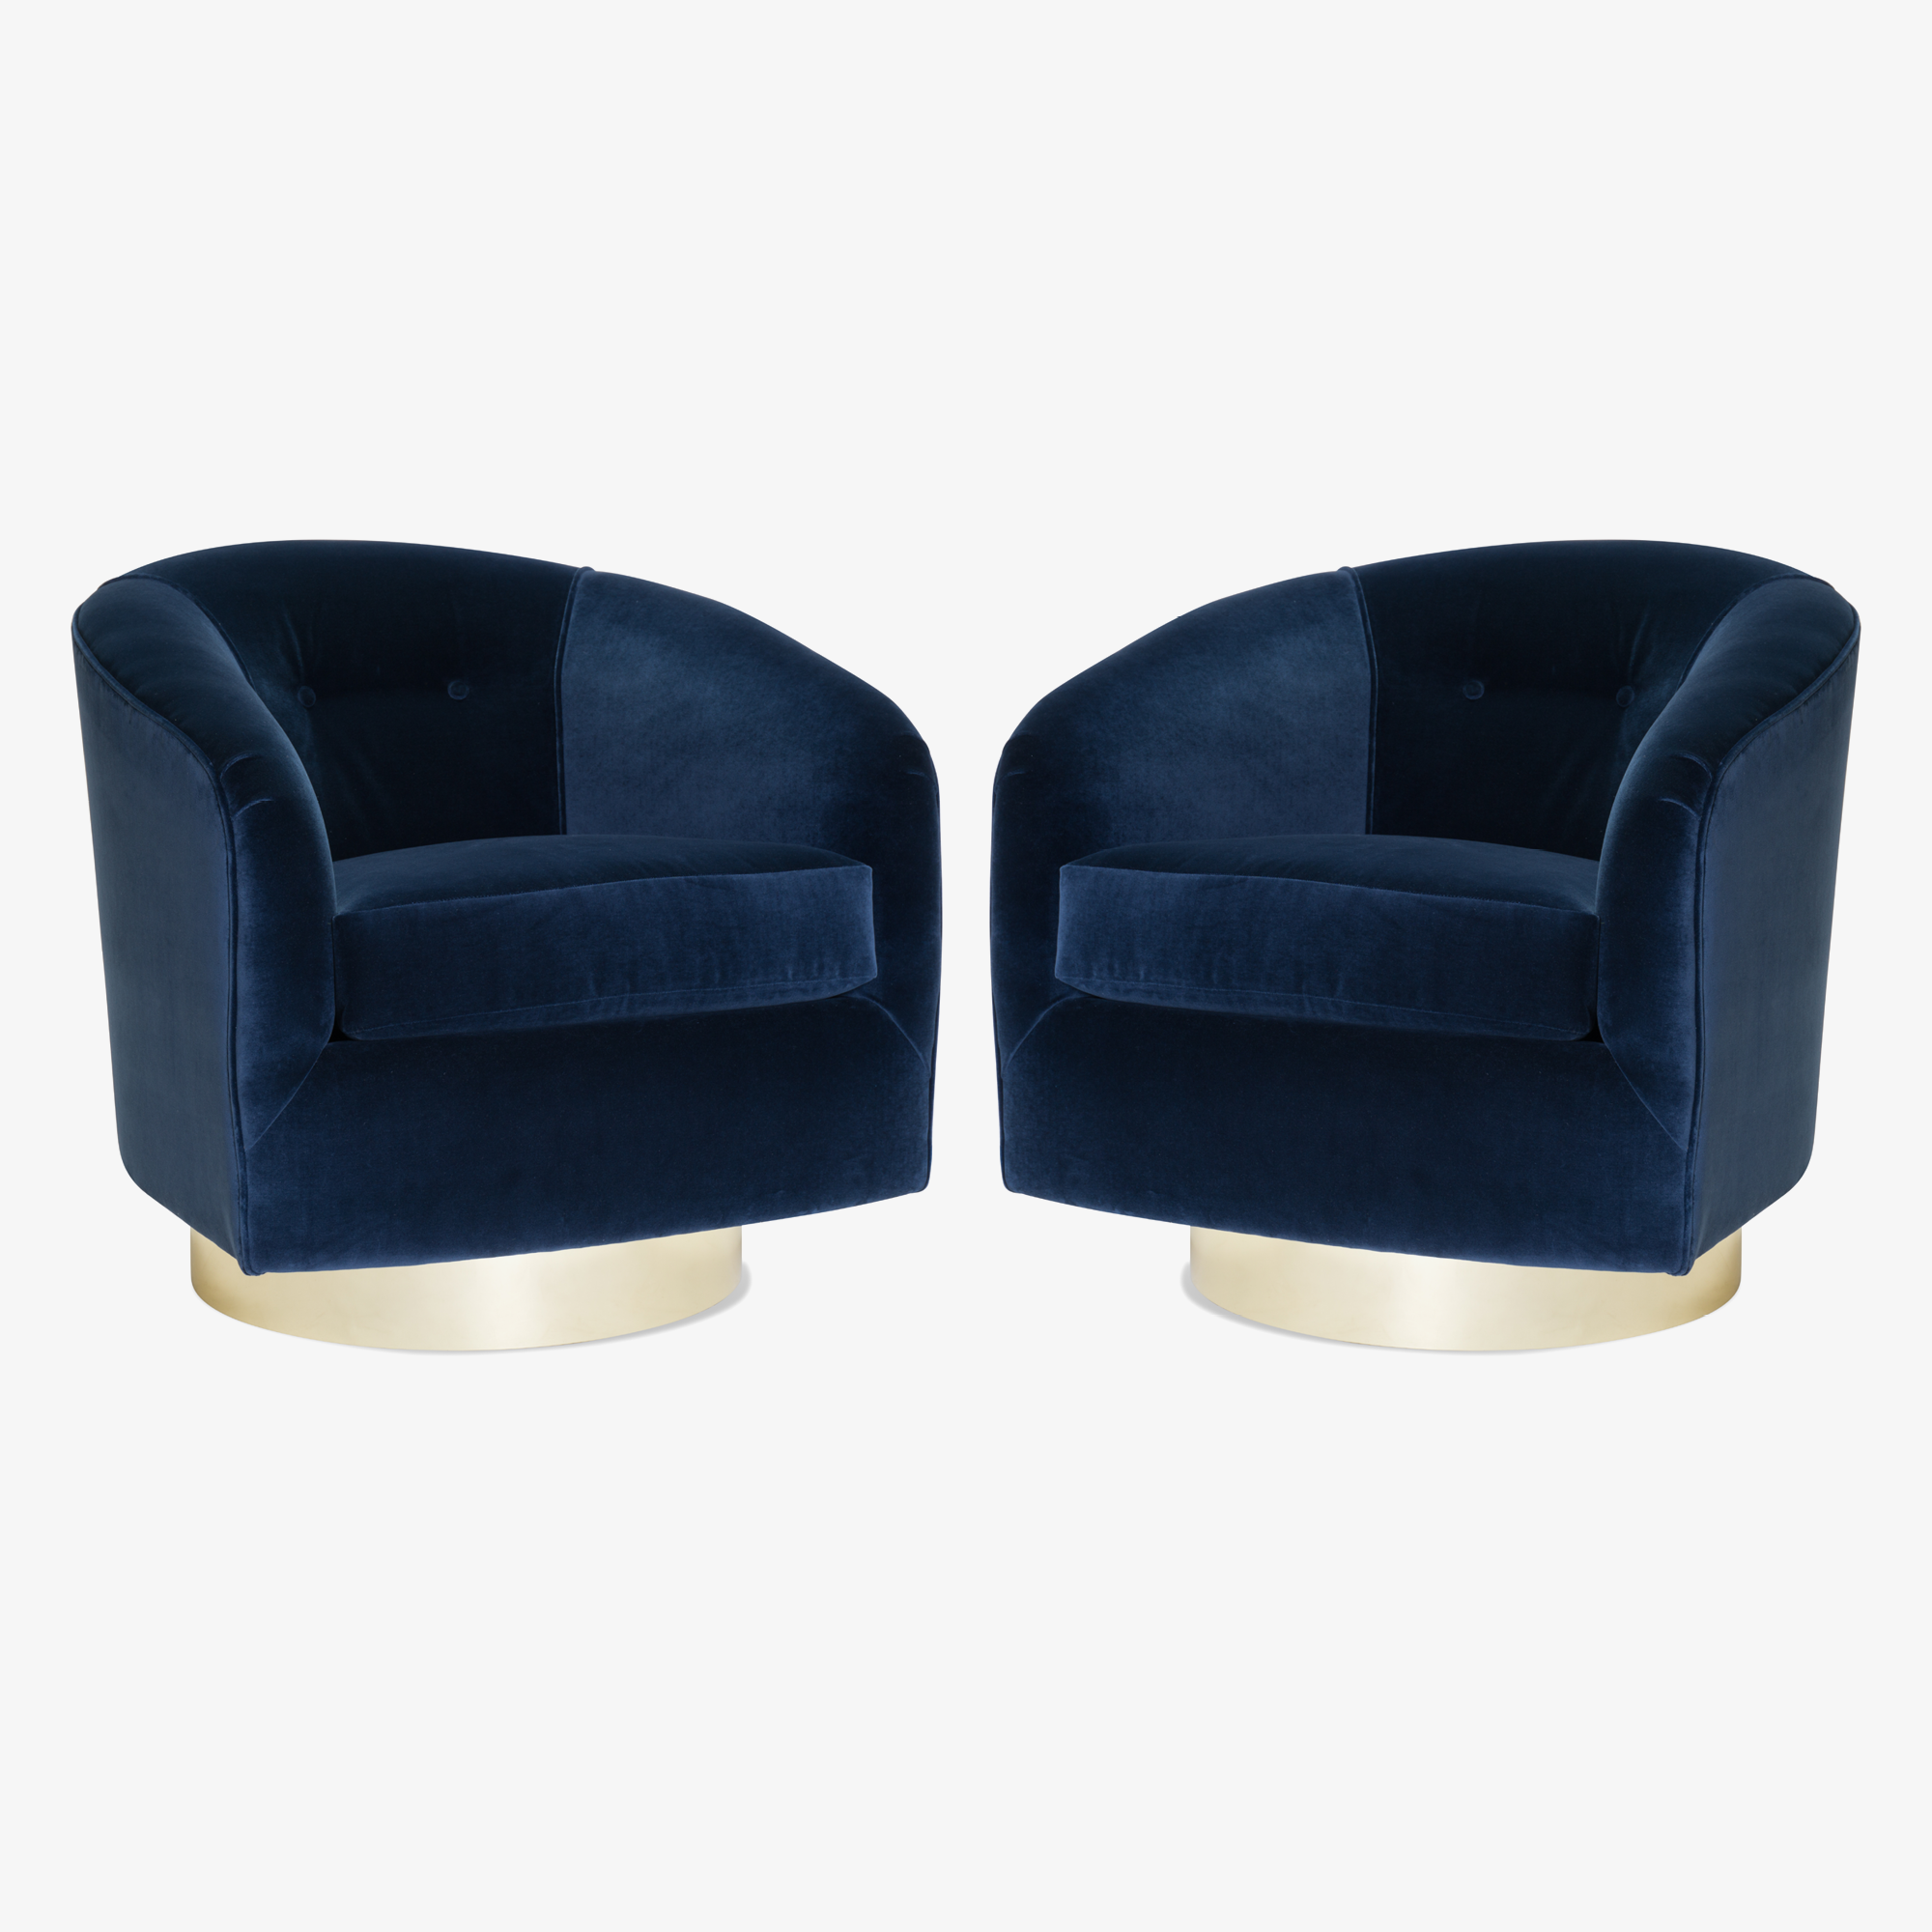 Swivel Tub Chairs in Navy Velvet with Polished Brass Bases, Pair2.png